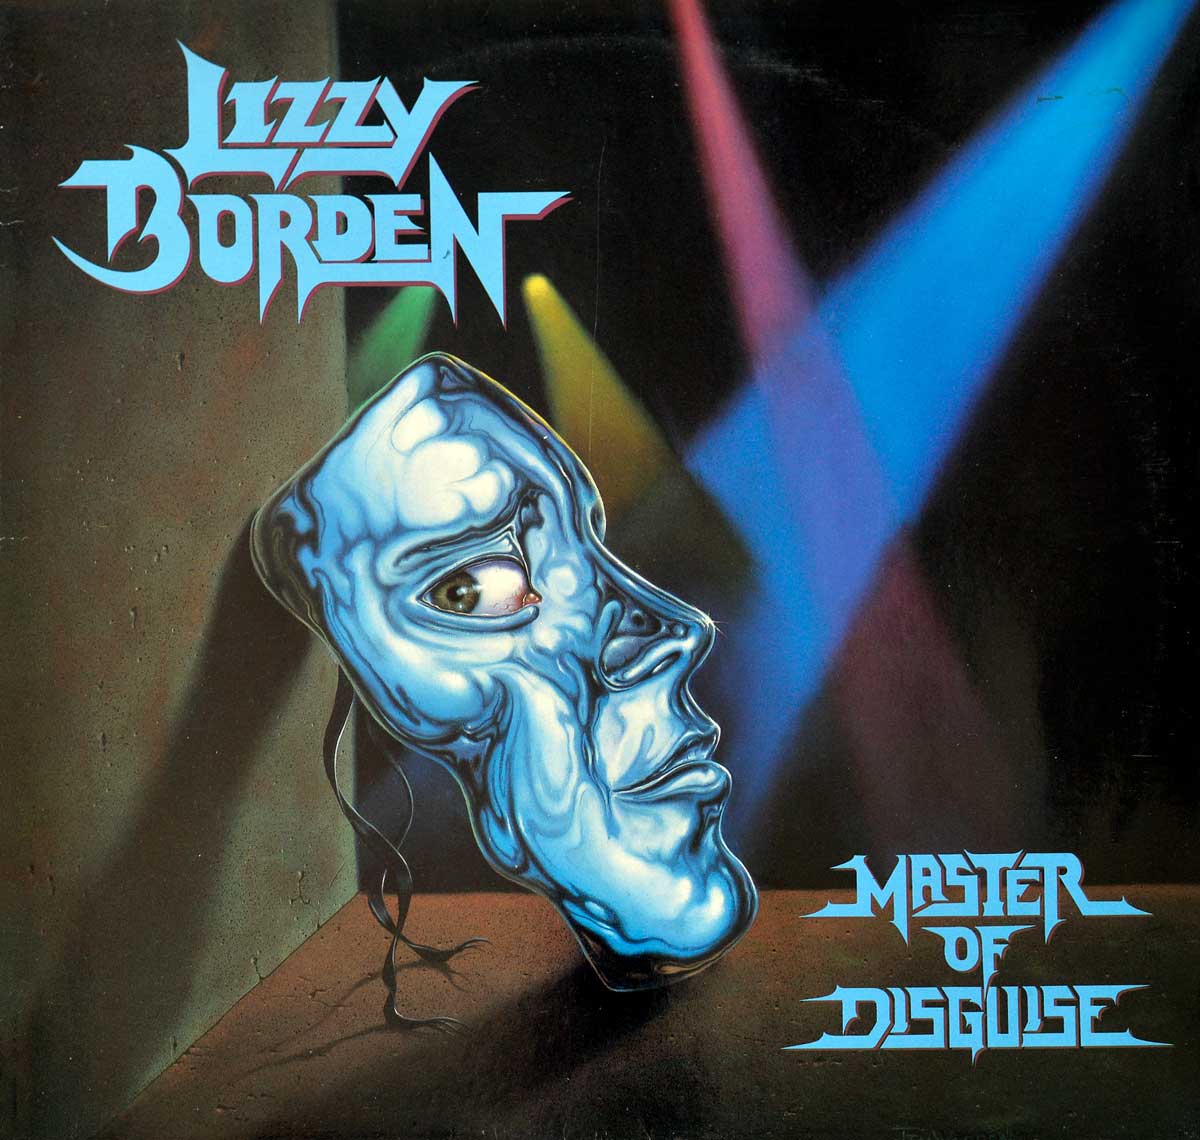 High Resolution Photo Album Front Cover of LIZZY BORDEN Master of Disguise https://vinyl-records.nl